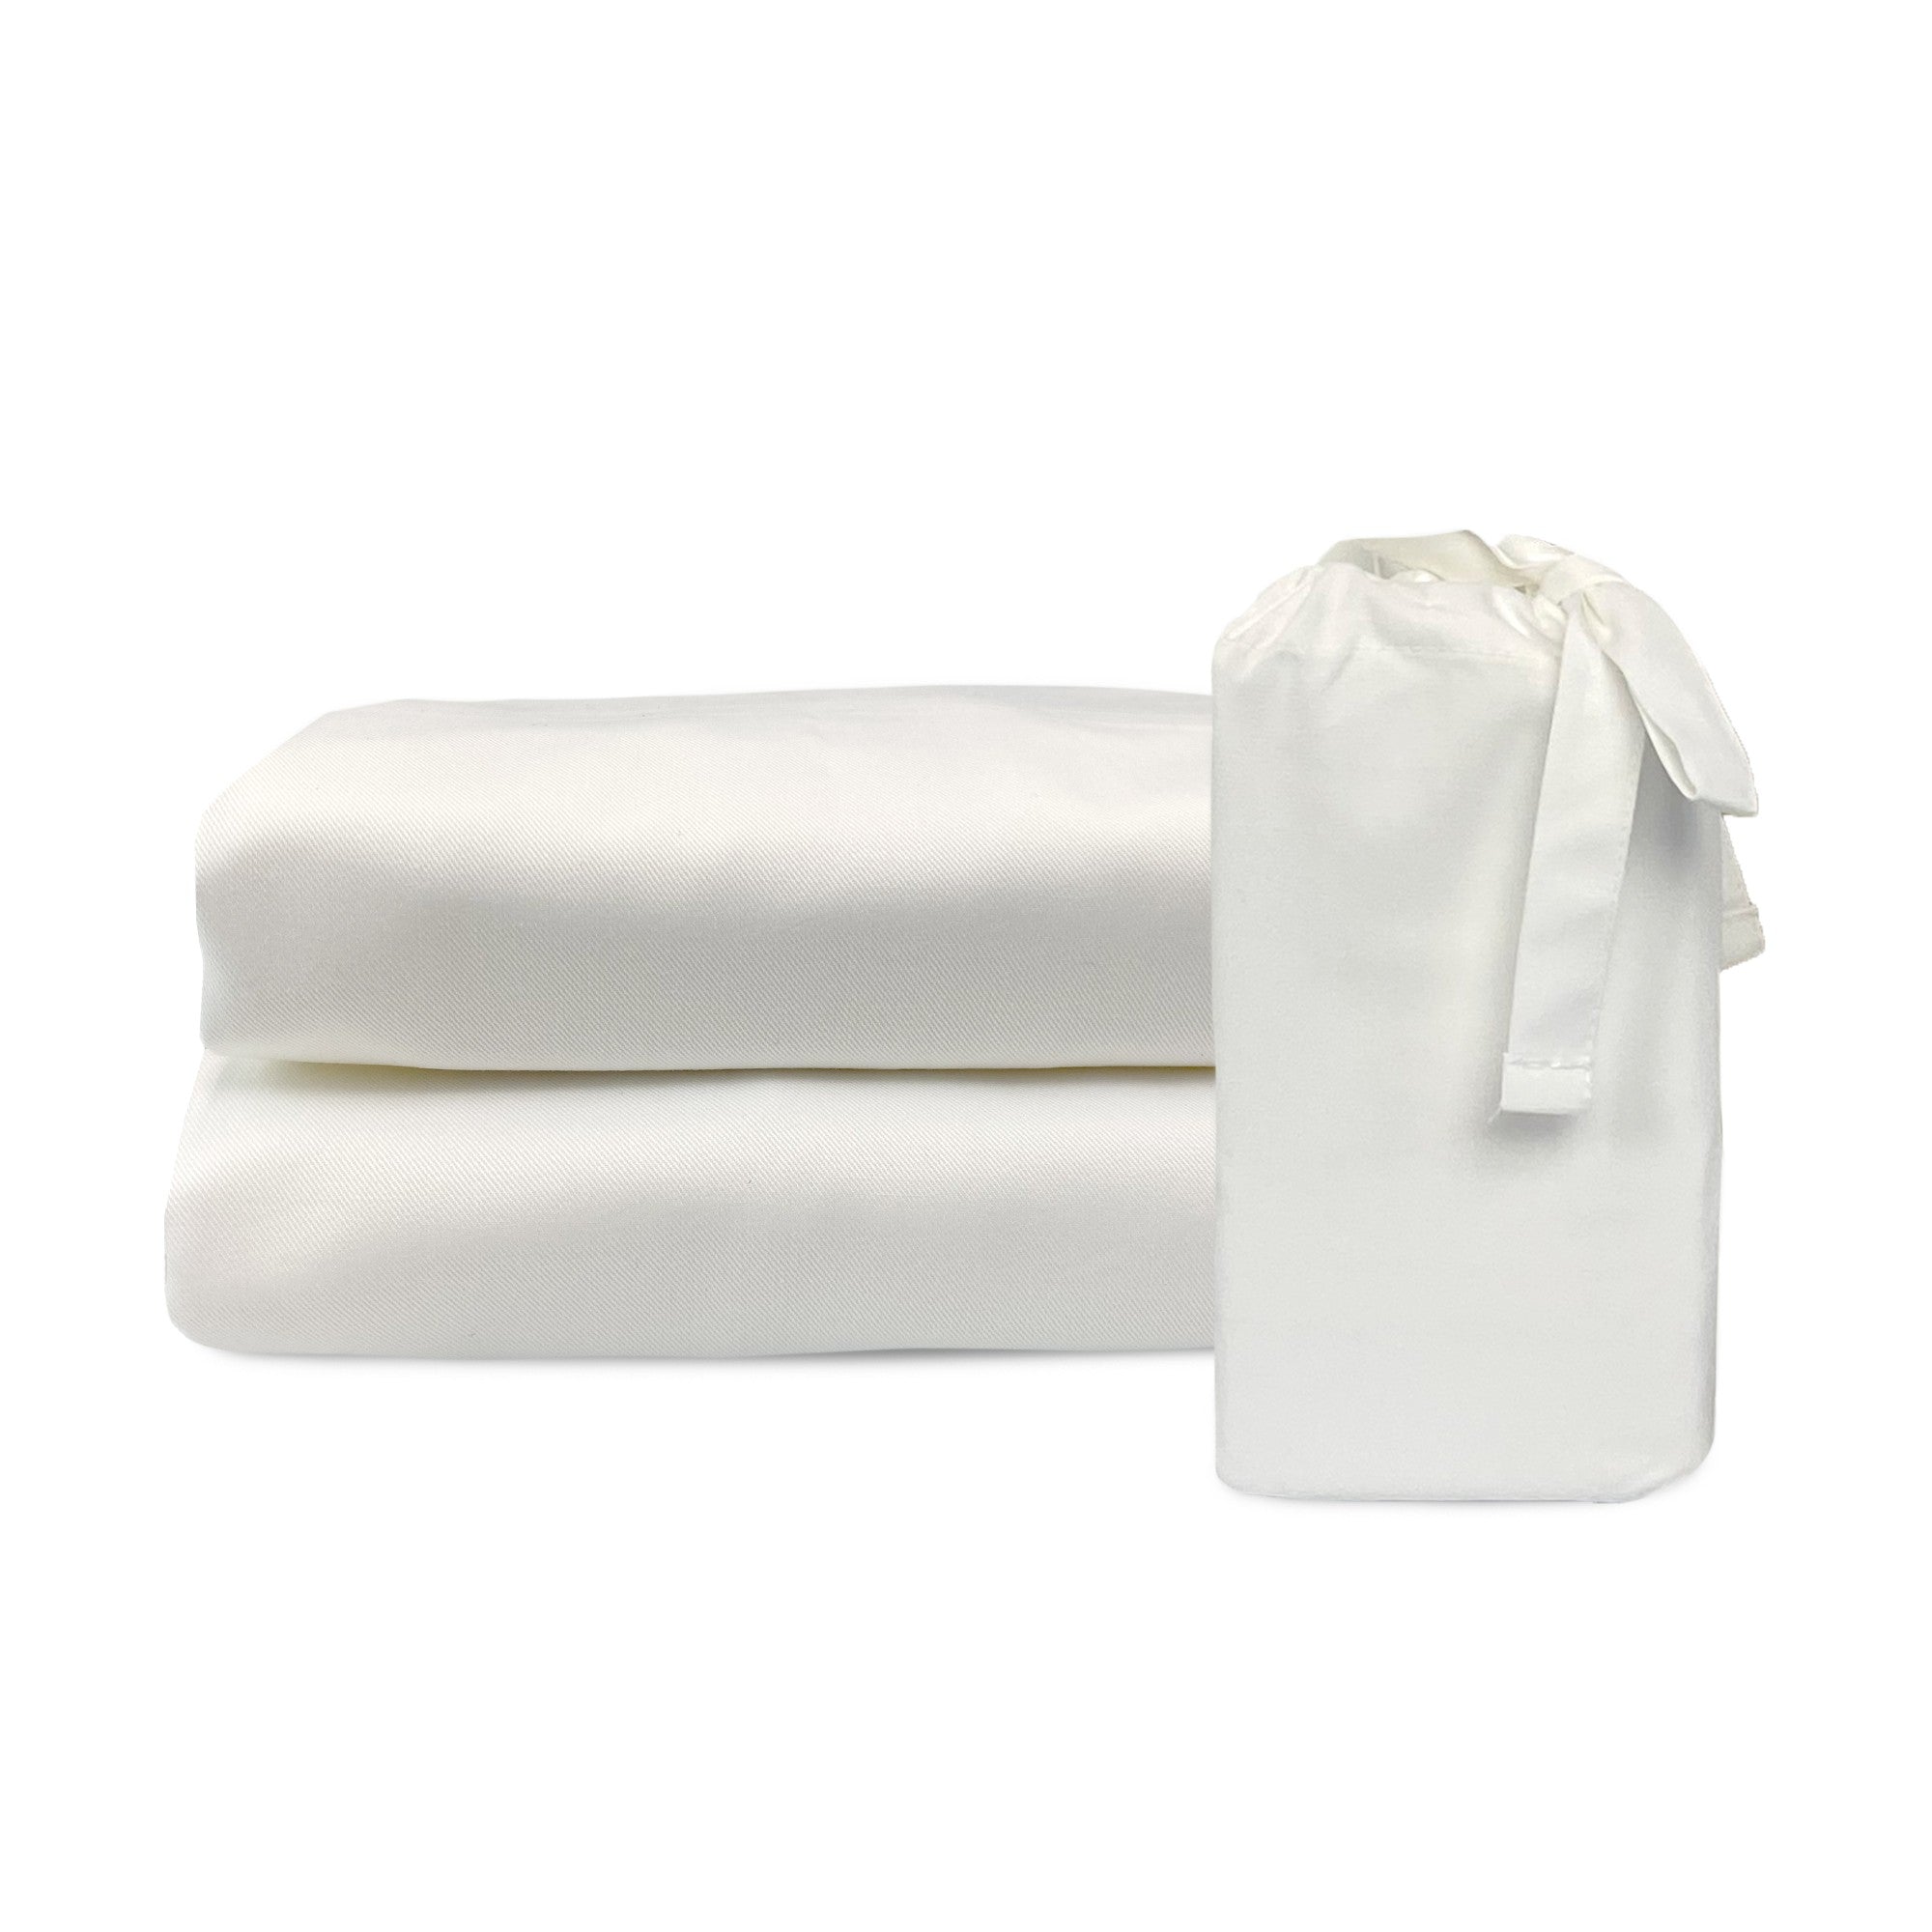 MELANGE Bamboo Pillowcase Sets - Resistant to Bacteria and Odors, Ultra Smooth and Hypoallergenic Pillow Cover Sets - Snow